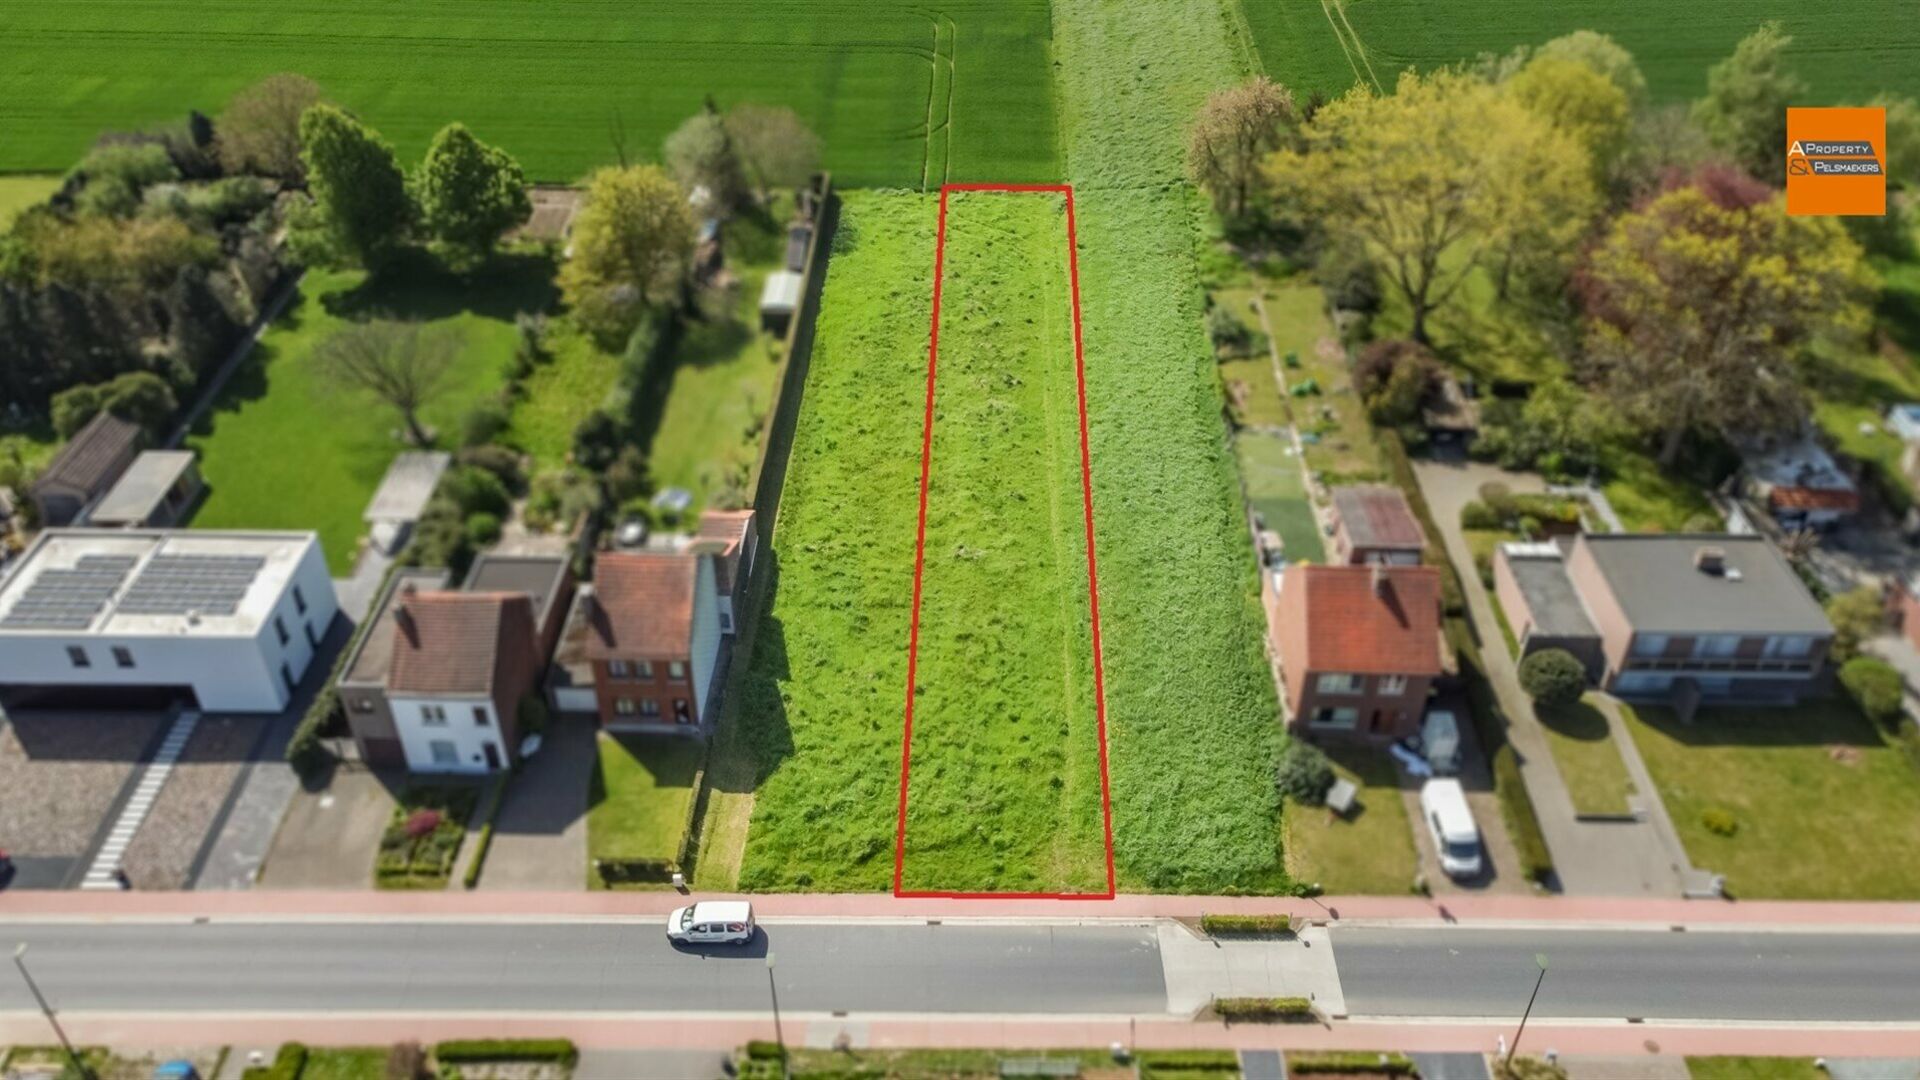 Building land for sale in OUD-HEVERLEE